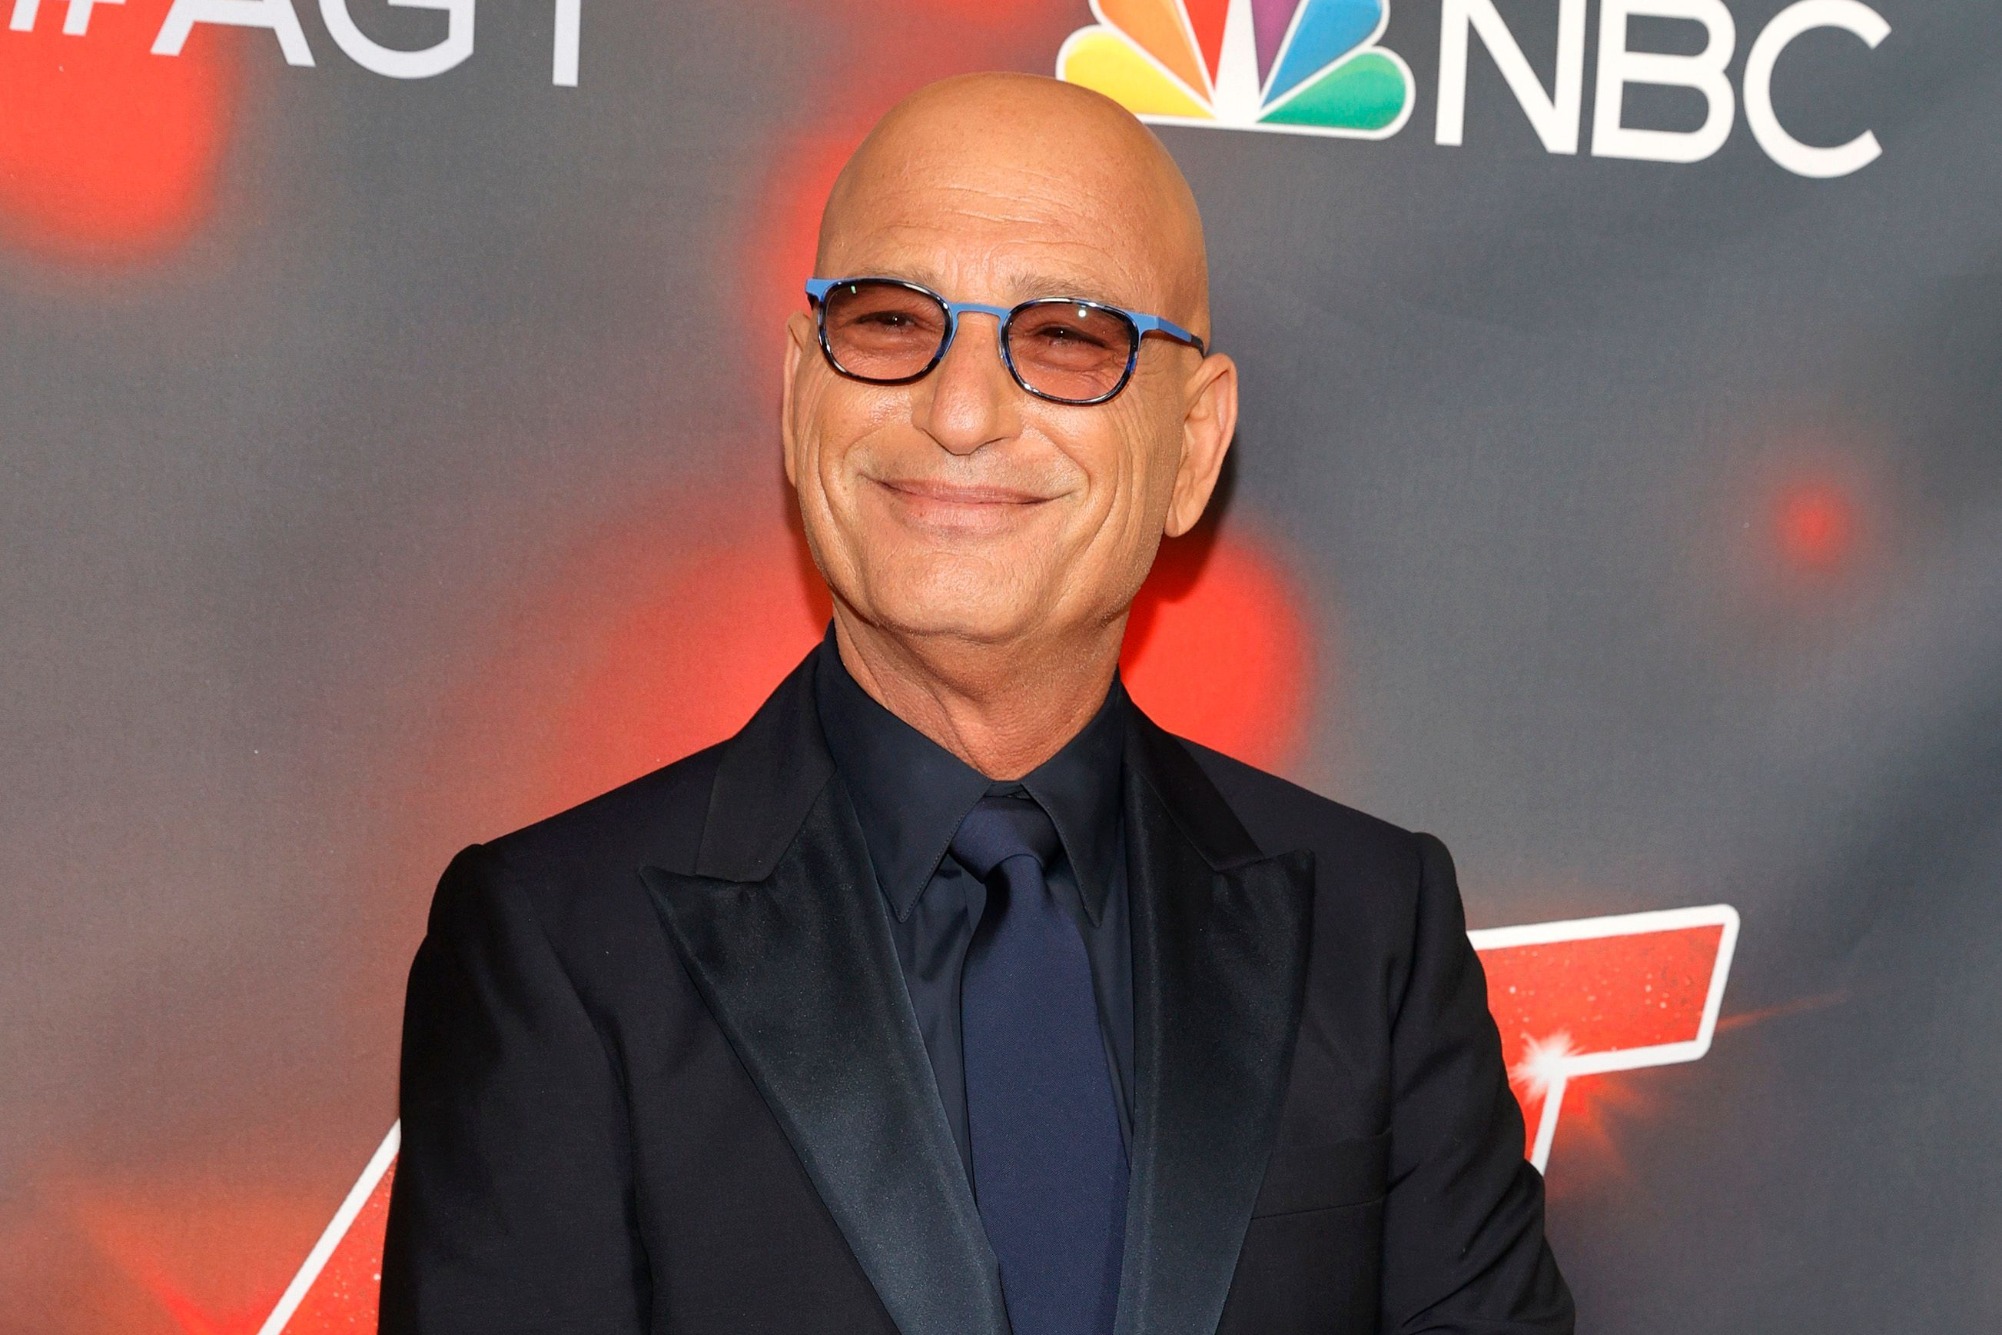 Howie Mandel Shares Health Update After Collapsing in Local Starbucks